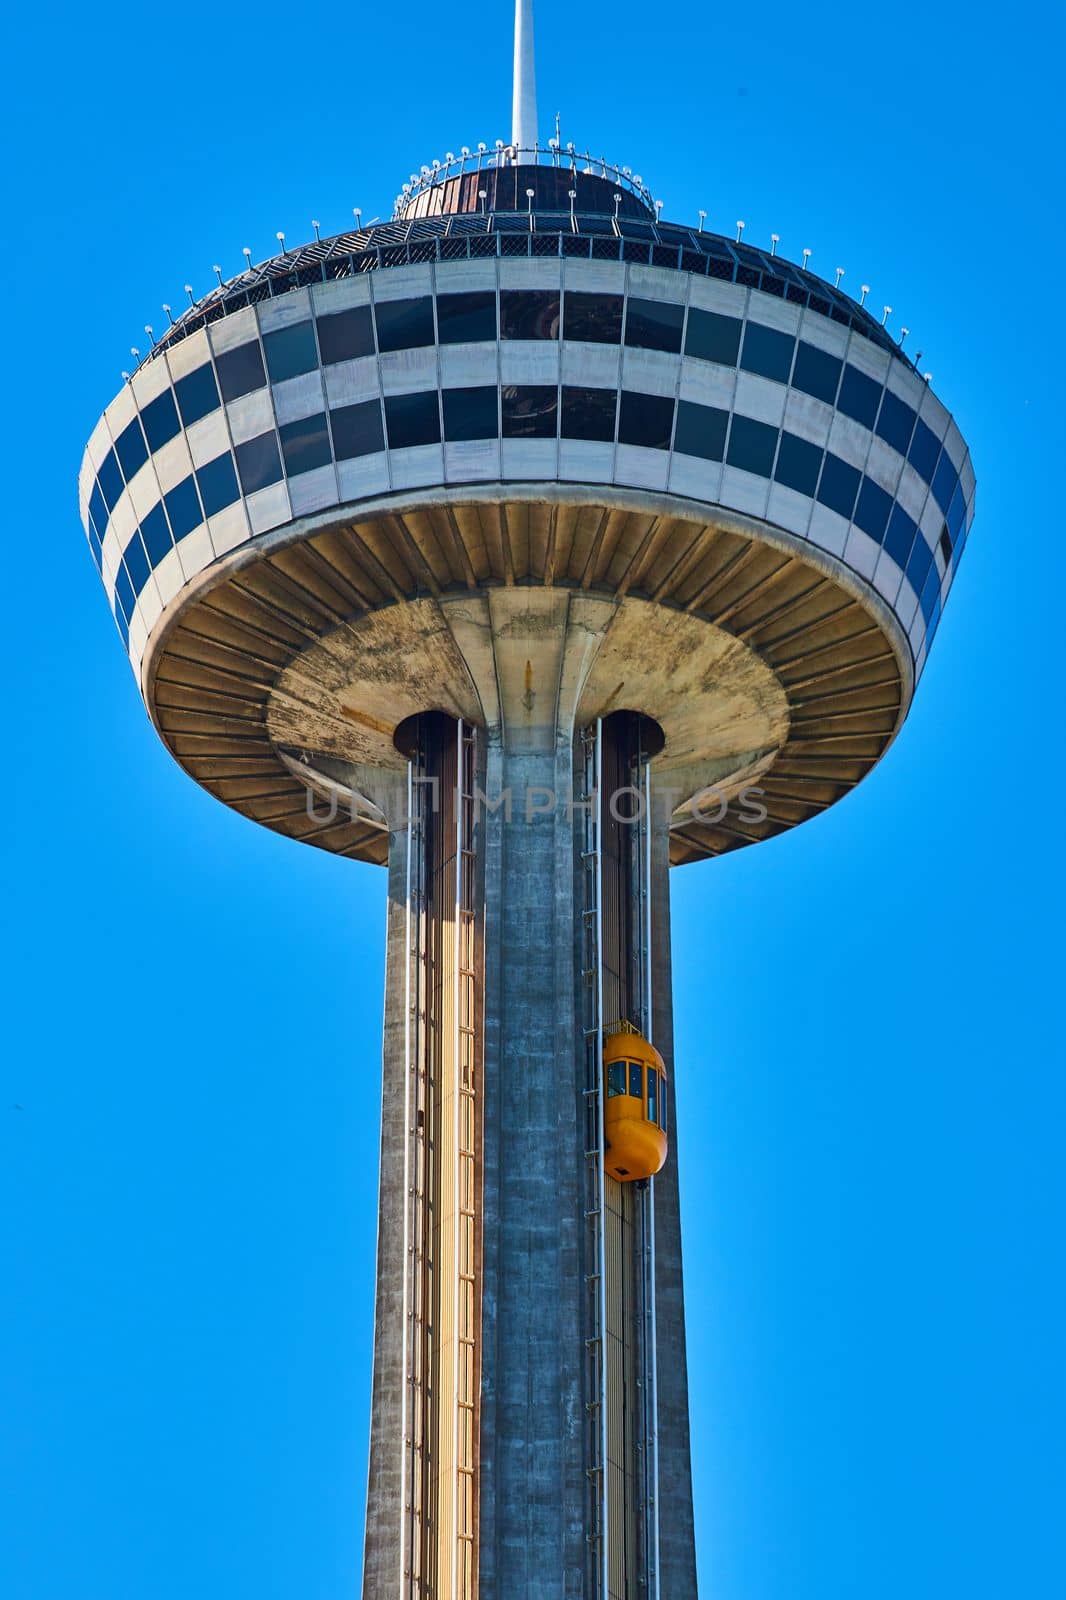 Elevator going up huge Skylon Tower in Canada by Niagara Falls by njproductions